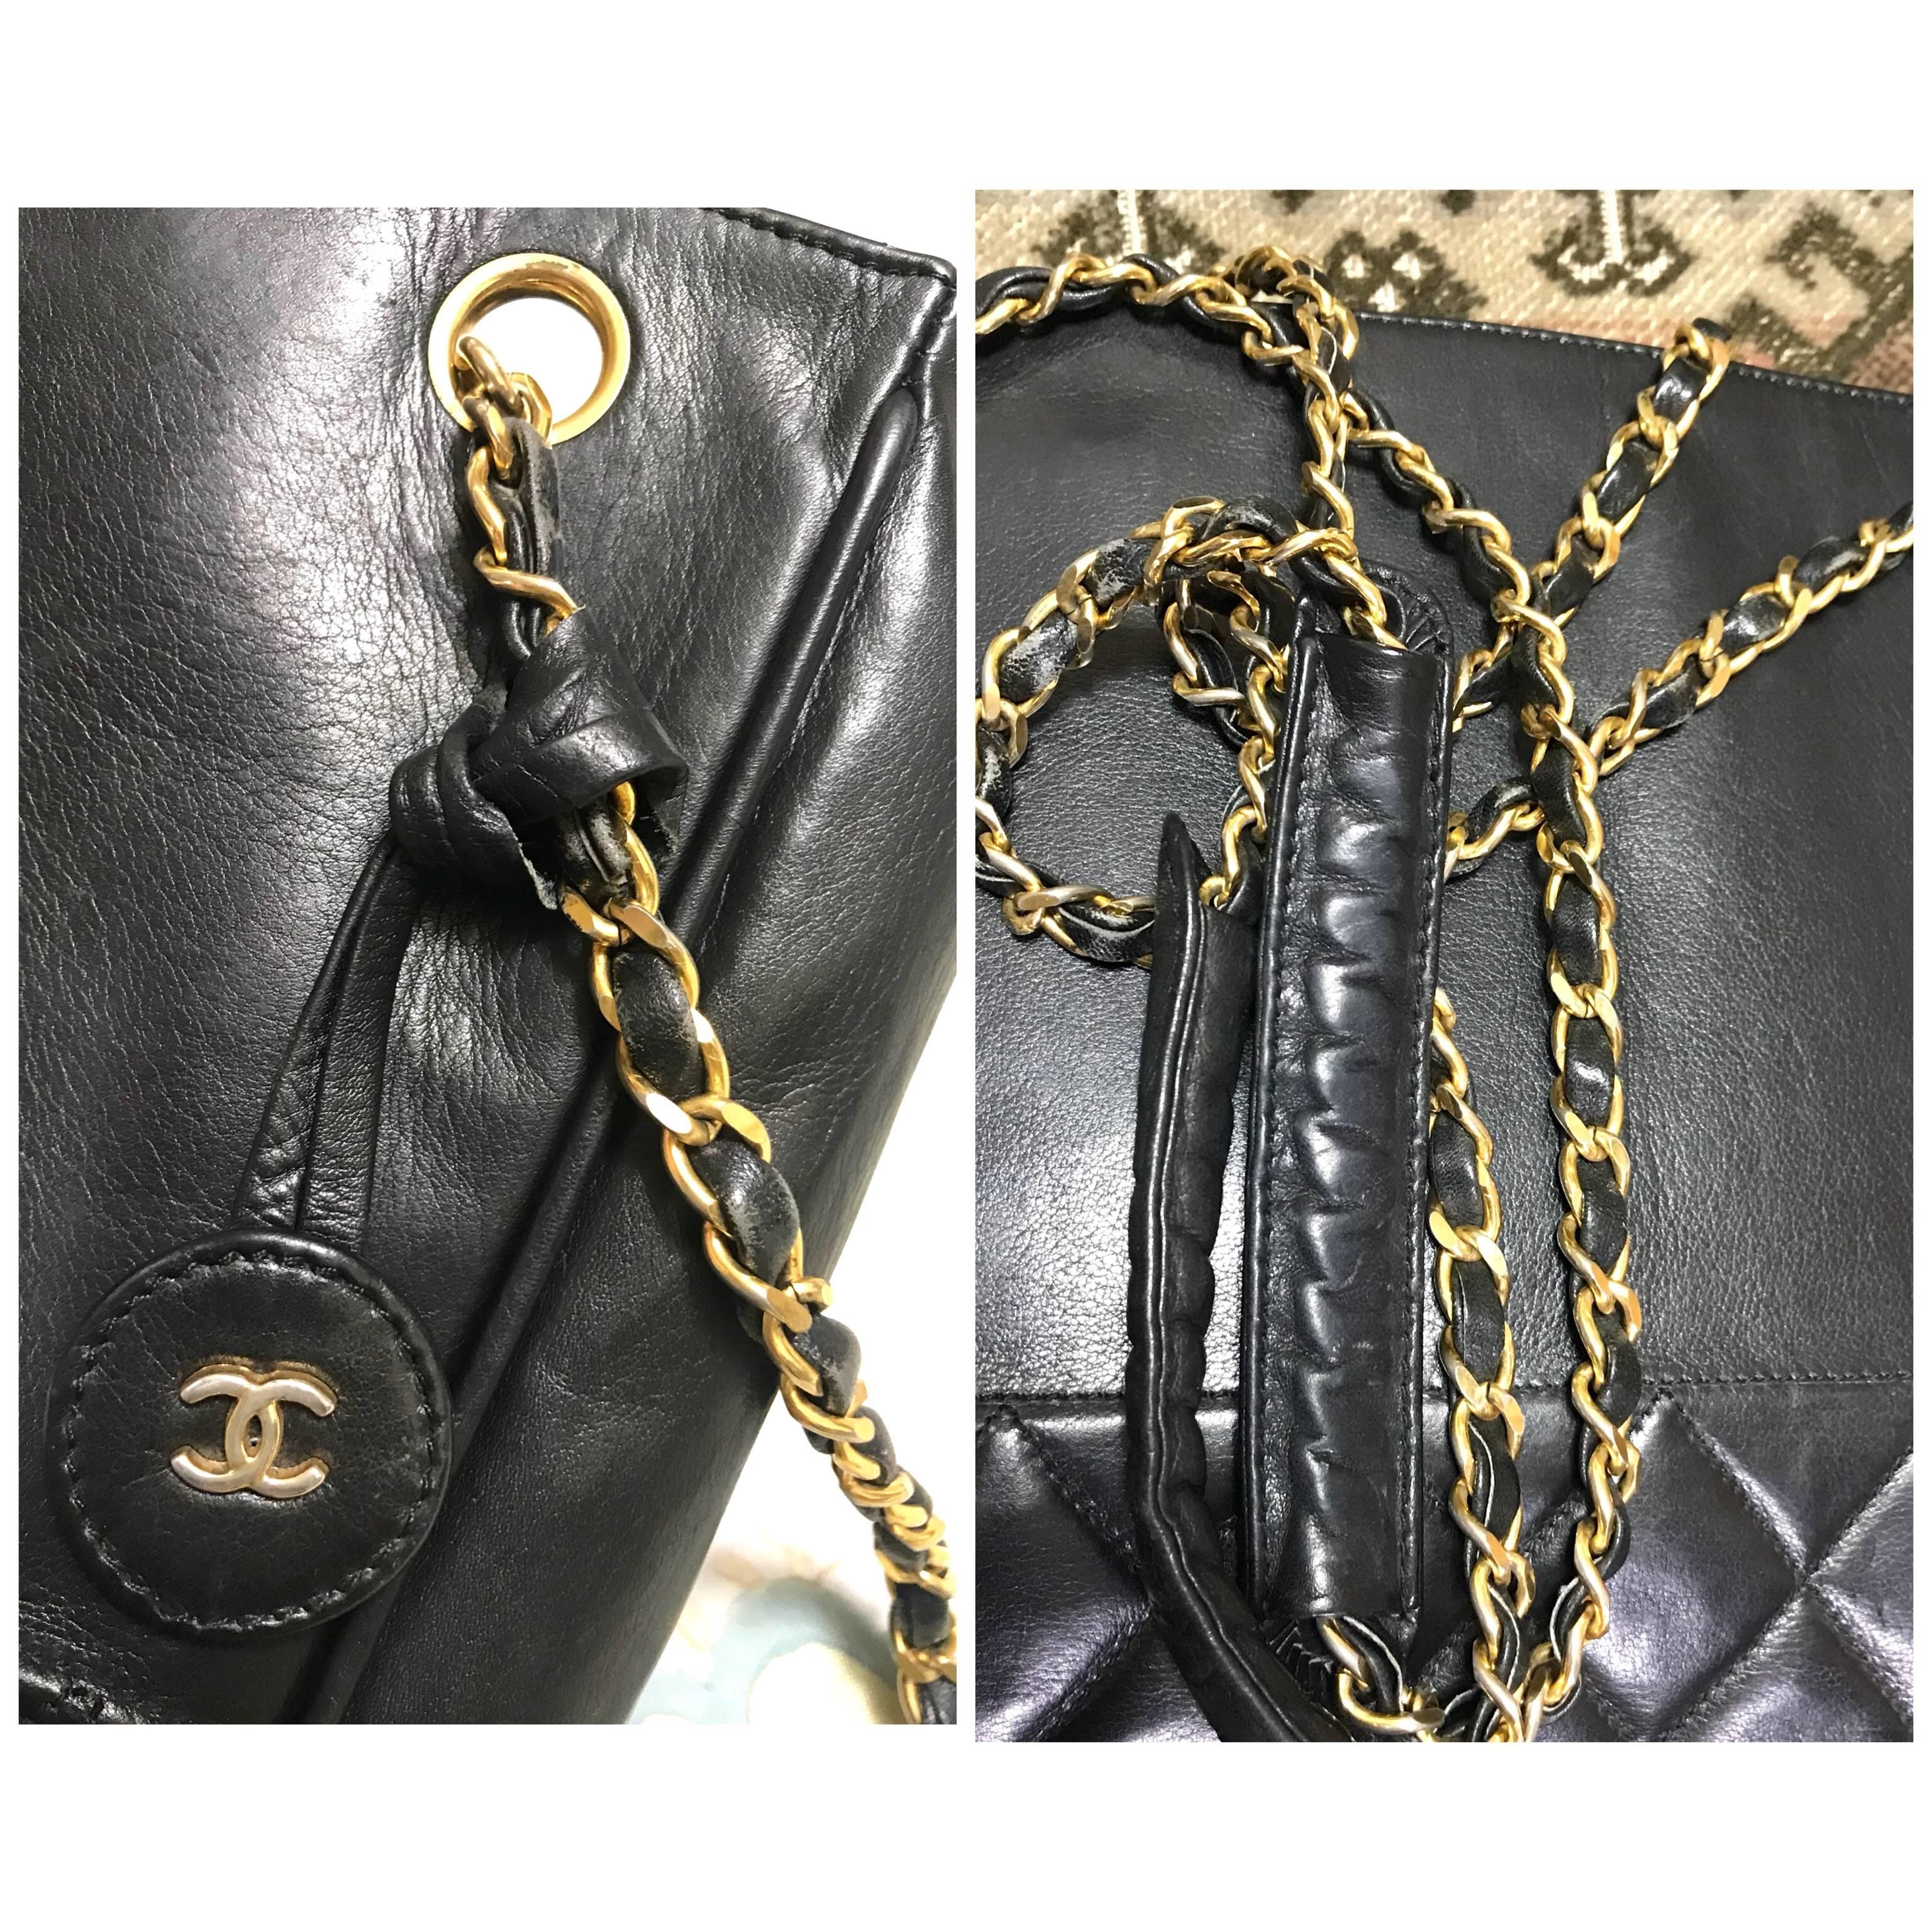 Vintage CHANEL classic black leather shoulder bag, tote purse with golden chains 1